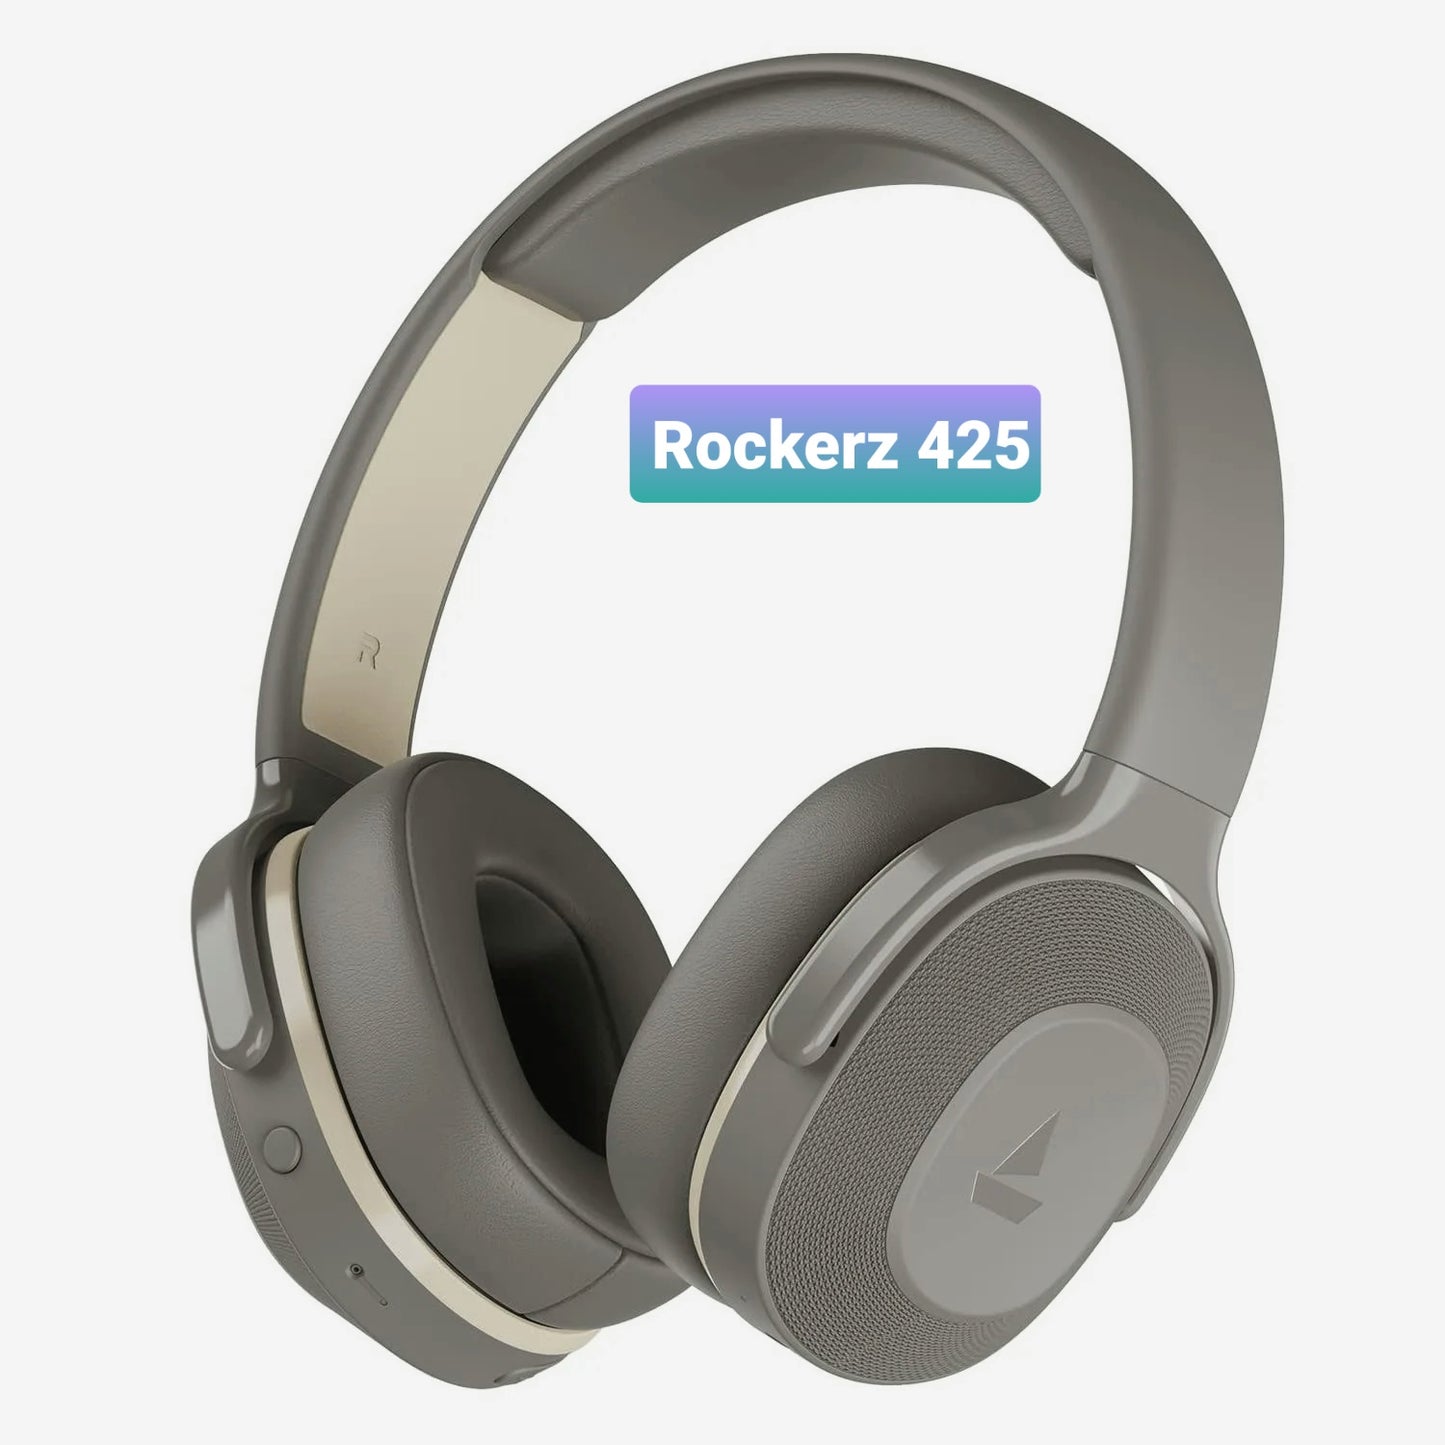 boAt Rockerz 425 Bluetooth Wireless Over Ear Headphones with Mic Signature Sound, Beast Mode for Gaming